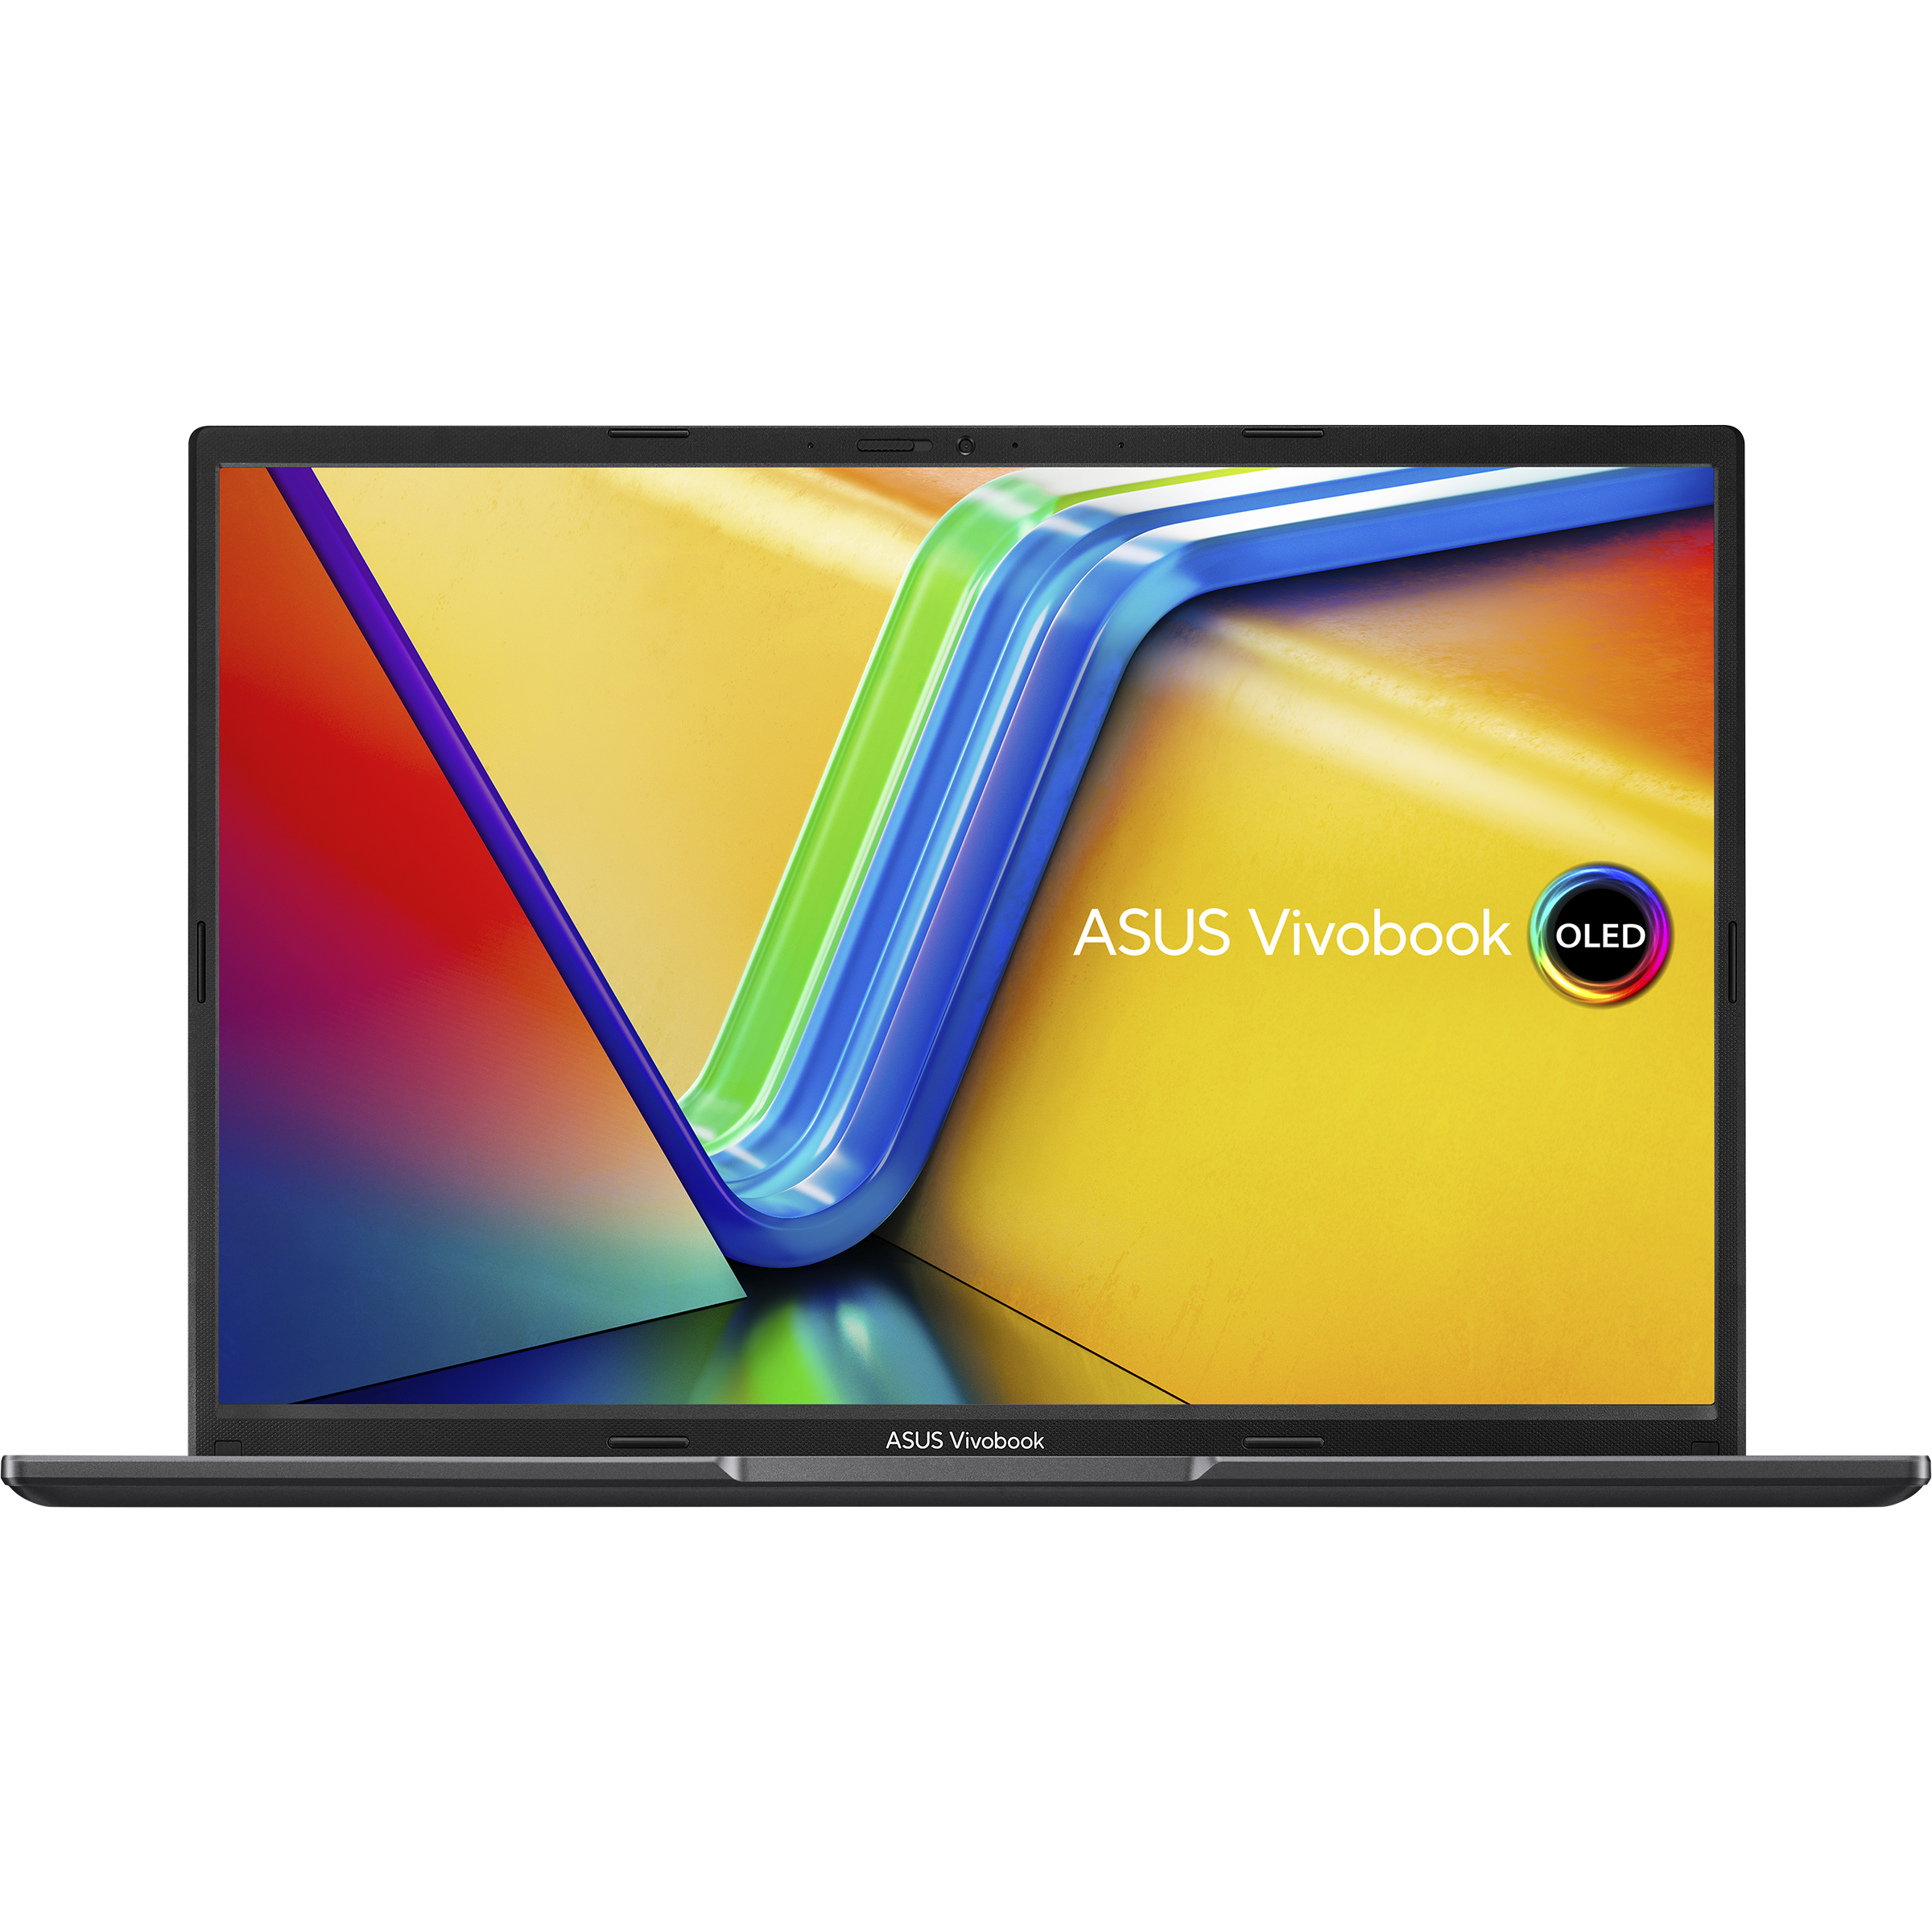 ASUS Vivobook 14 (M1405)｜Laptops For Home｜ASUS USA